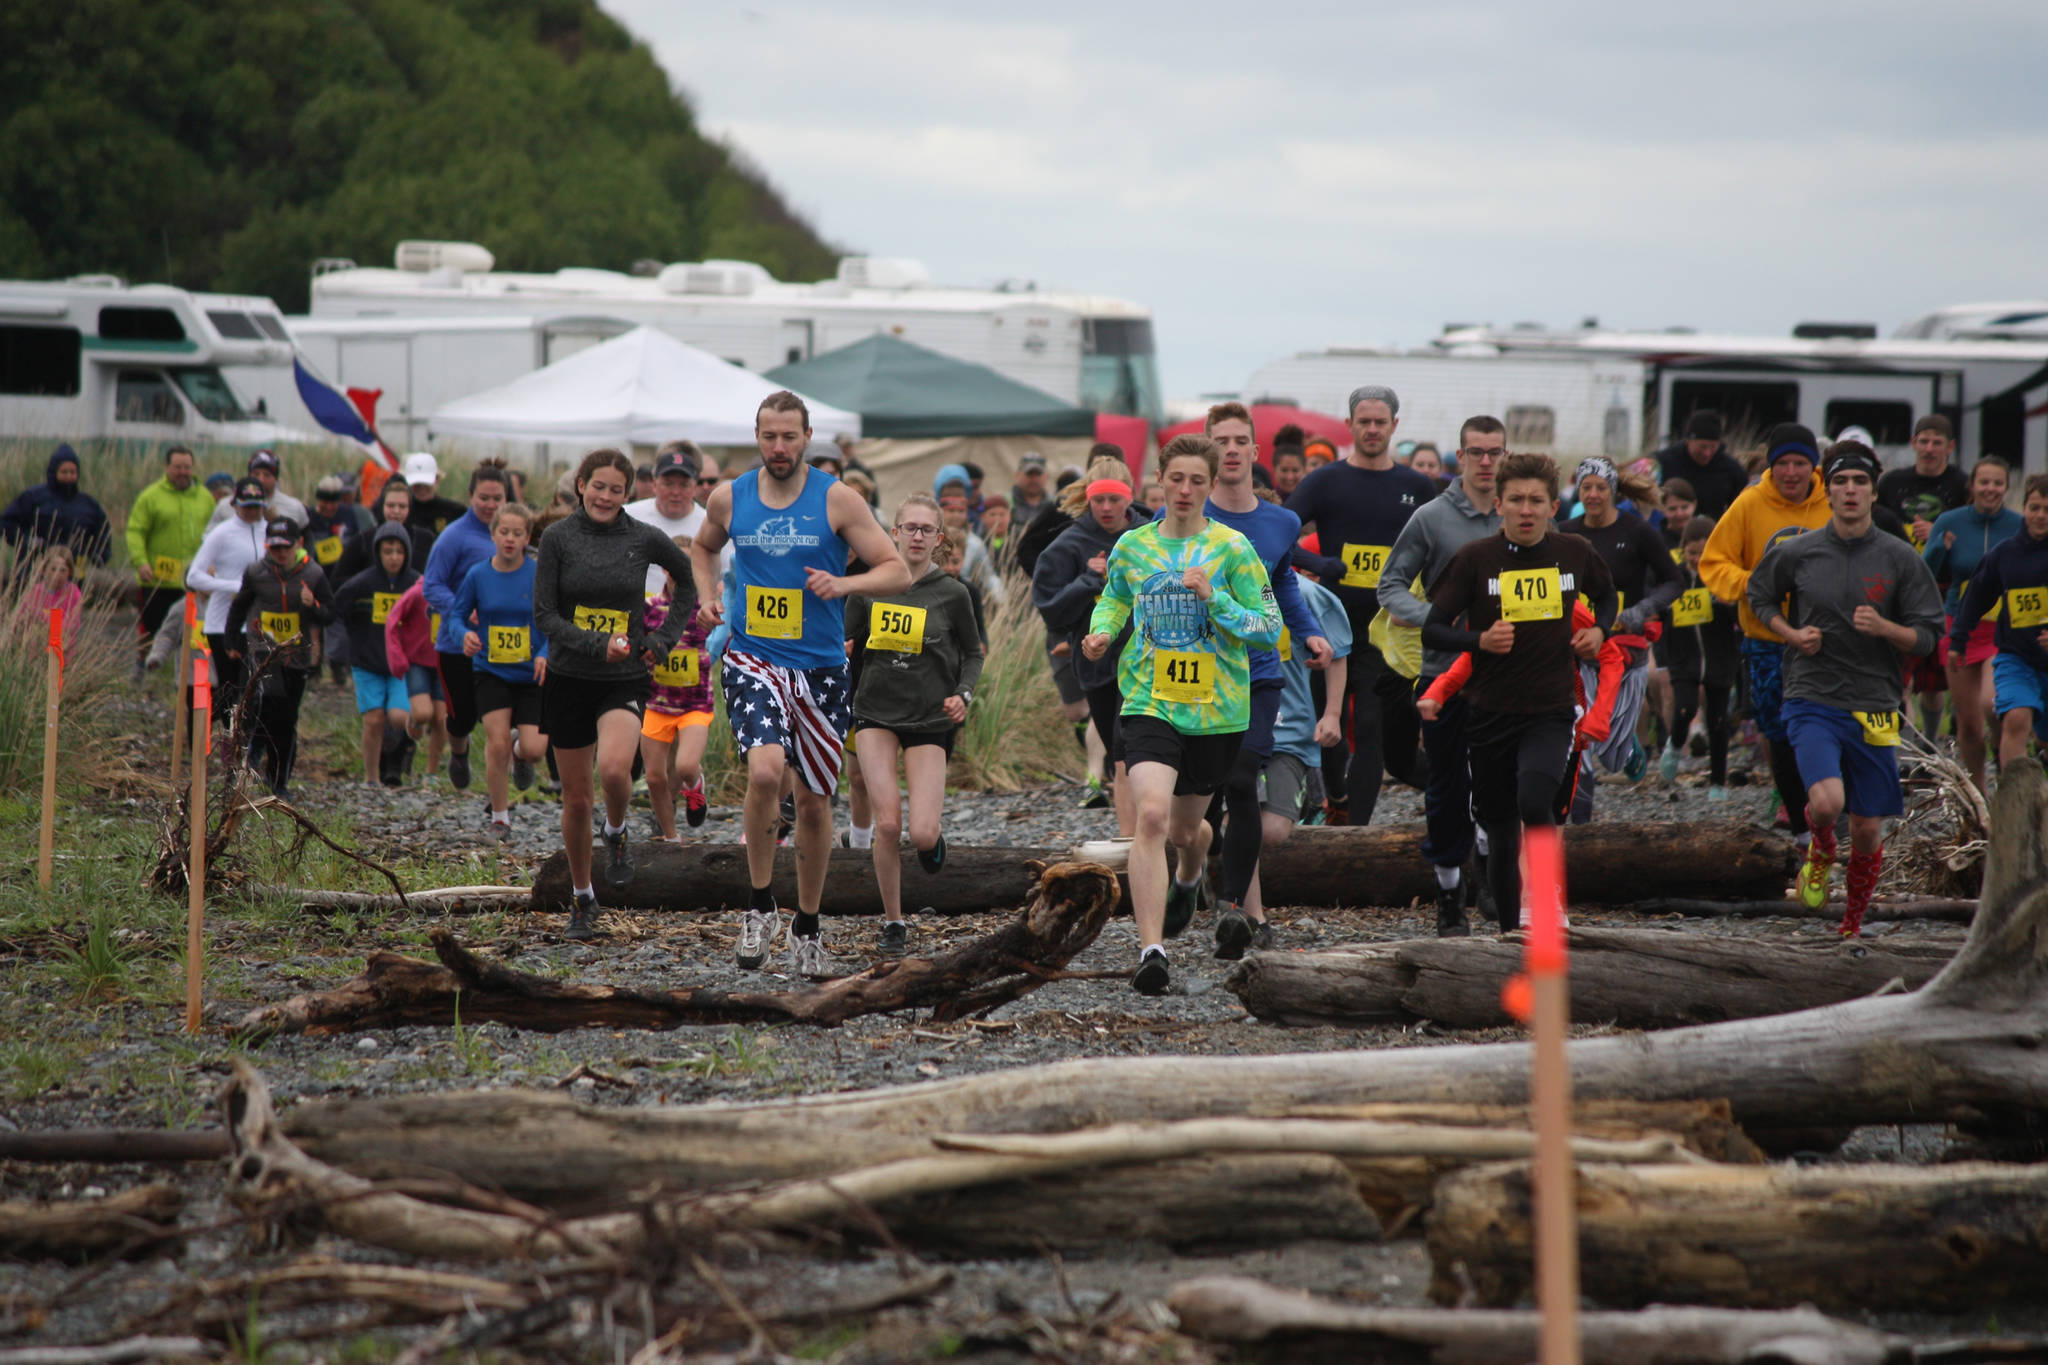 Runners in the 2018 Clam Scramble leave the starting line on the south side of Deep Creek and encounter their first obstacle: driftwood logs organizers of the 5K fun run laid across the course. The 2018 5K Clam Scramble was held June 16, 2018, in Ninilchik, Alaska. The fun run is held during low tide on Ninilchik beach. (Photo by Sabrina Ferguson)